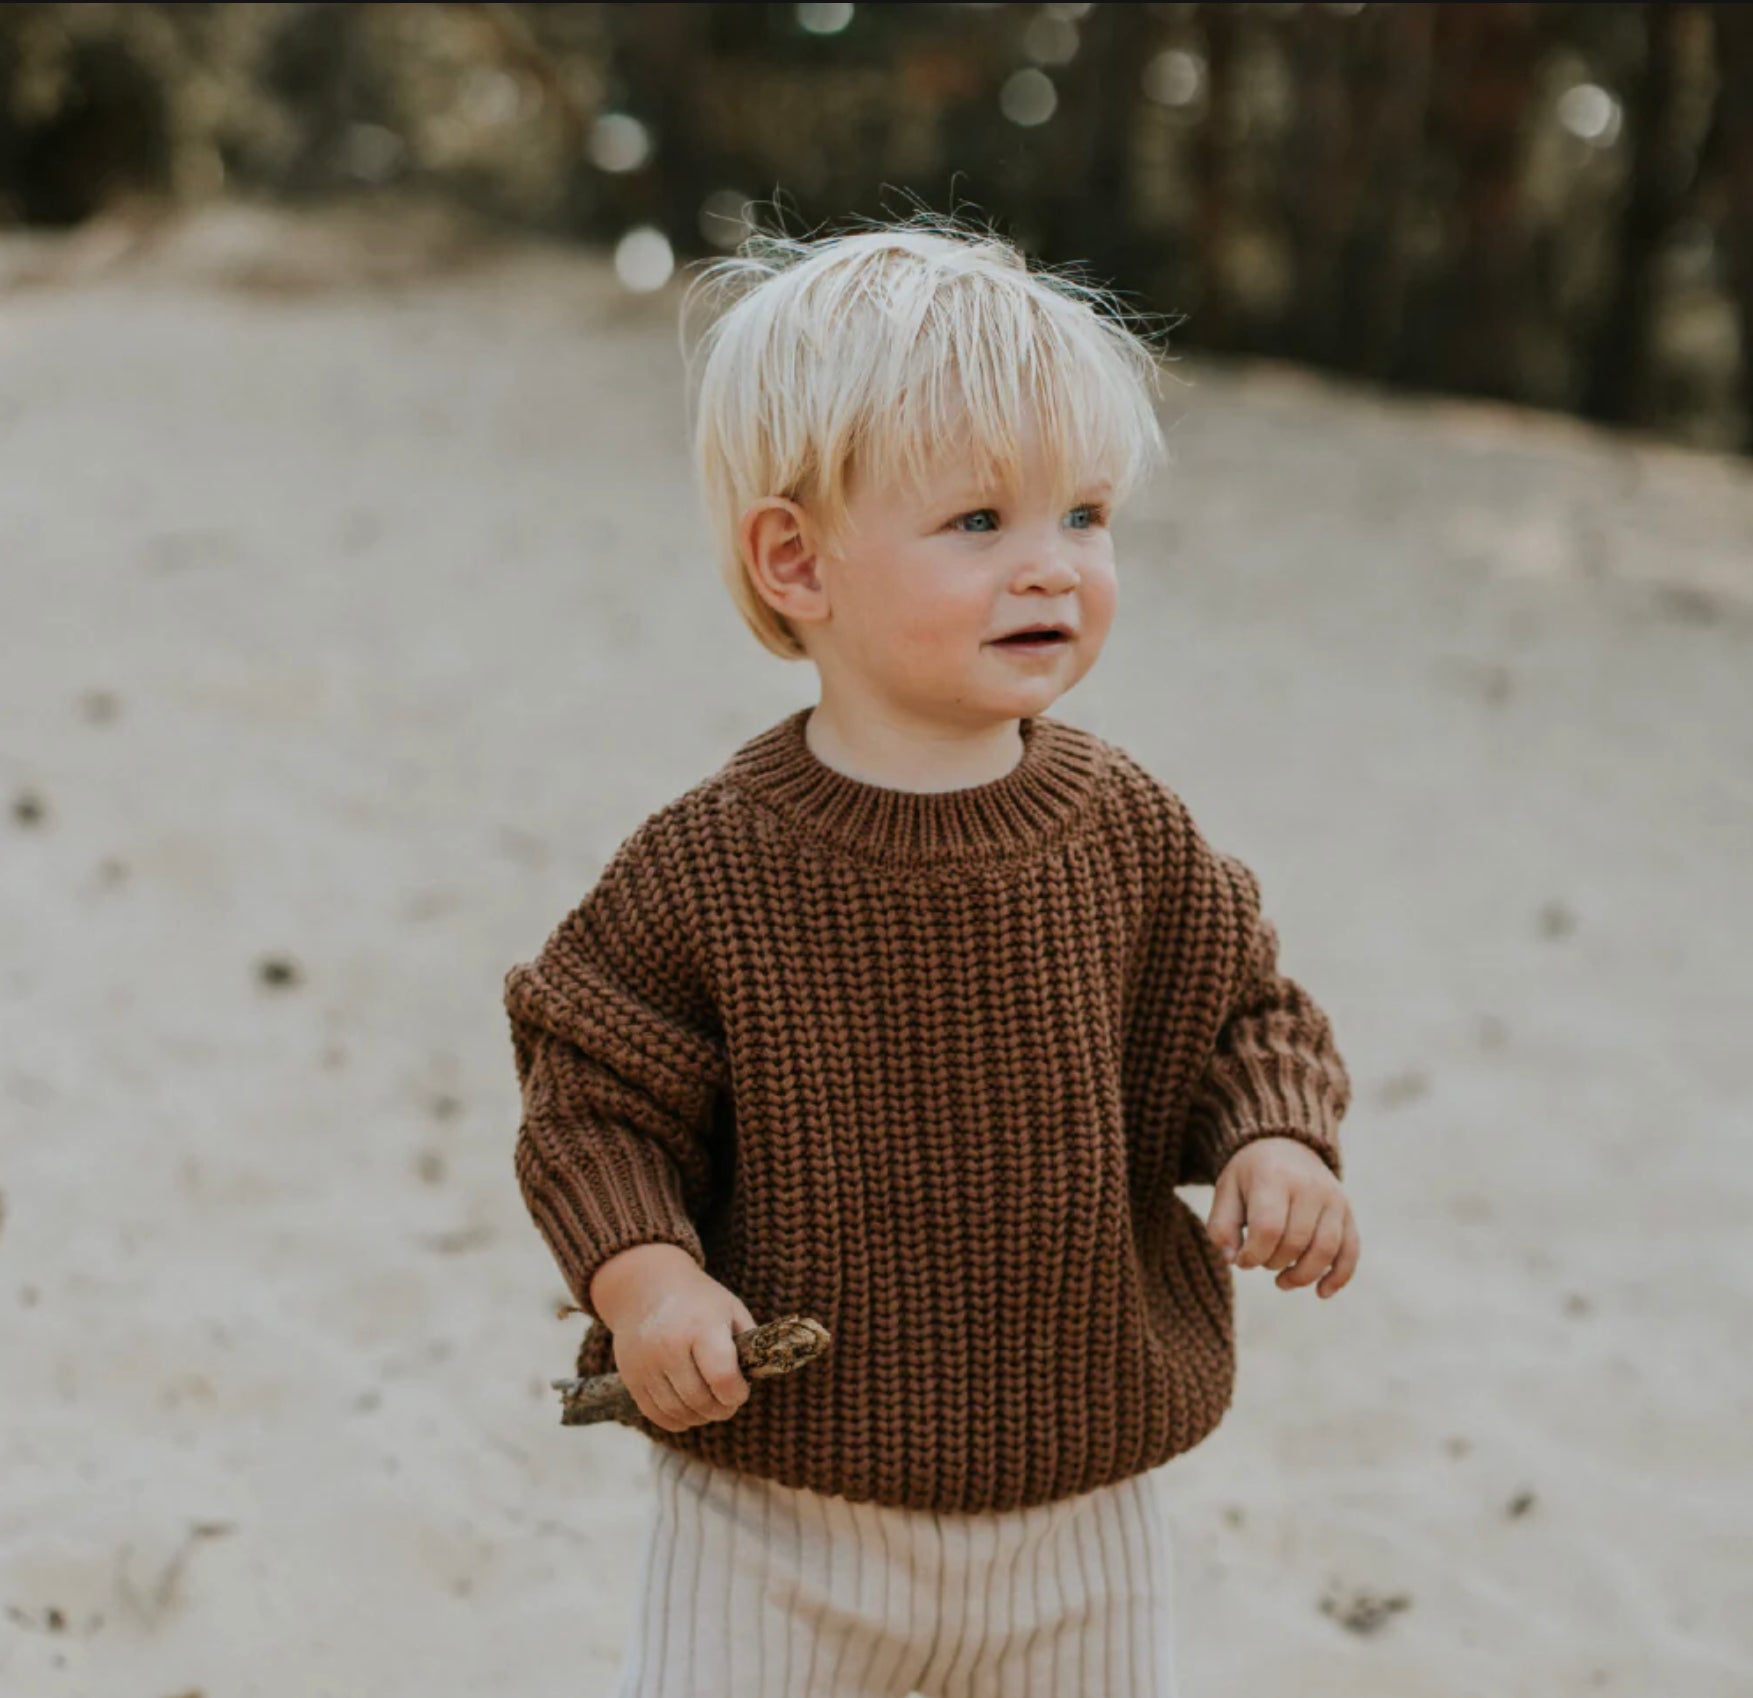 Baby wearing Yuki 100% organic cotton baby or child chunky knit sweater in color walnut